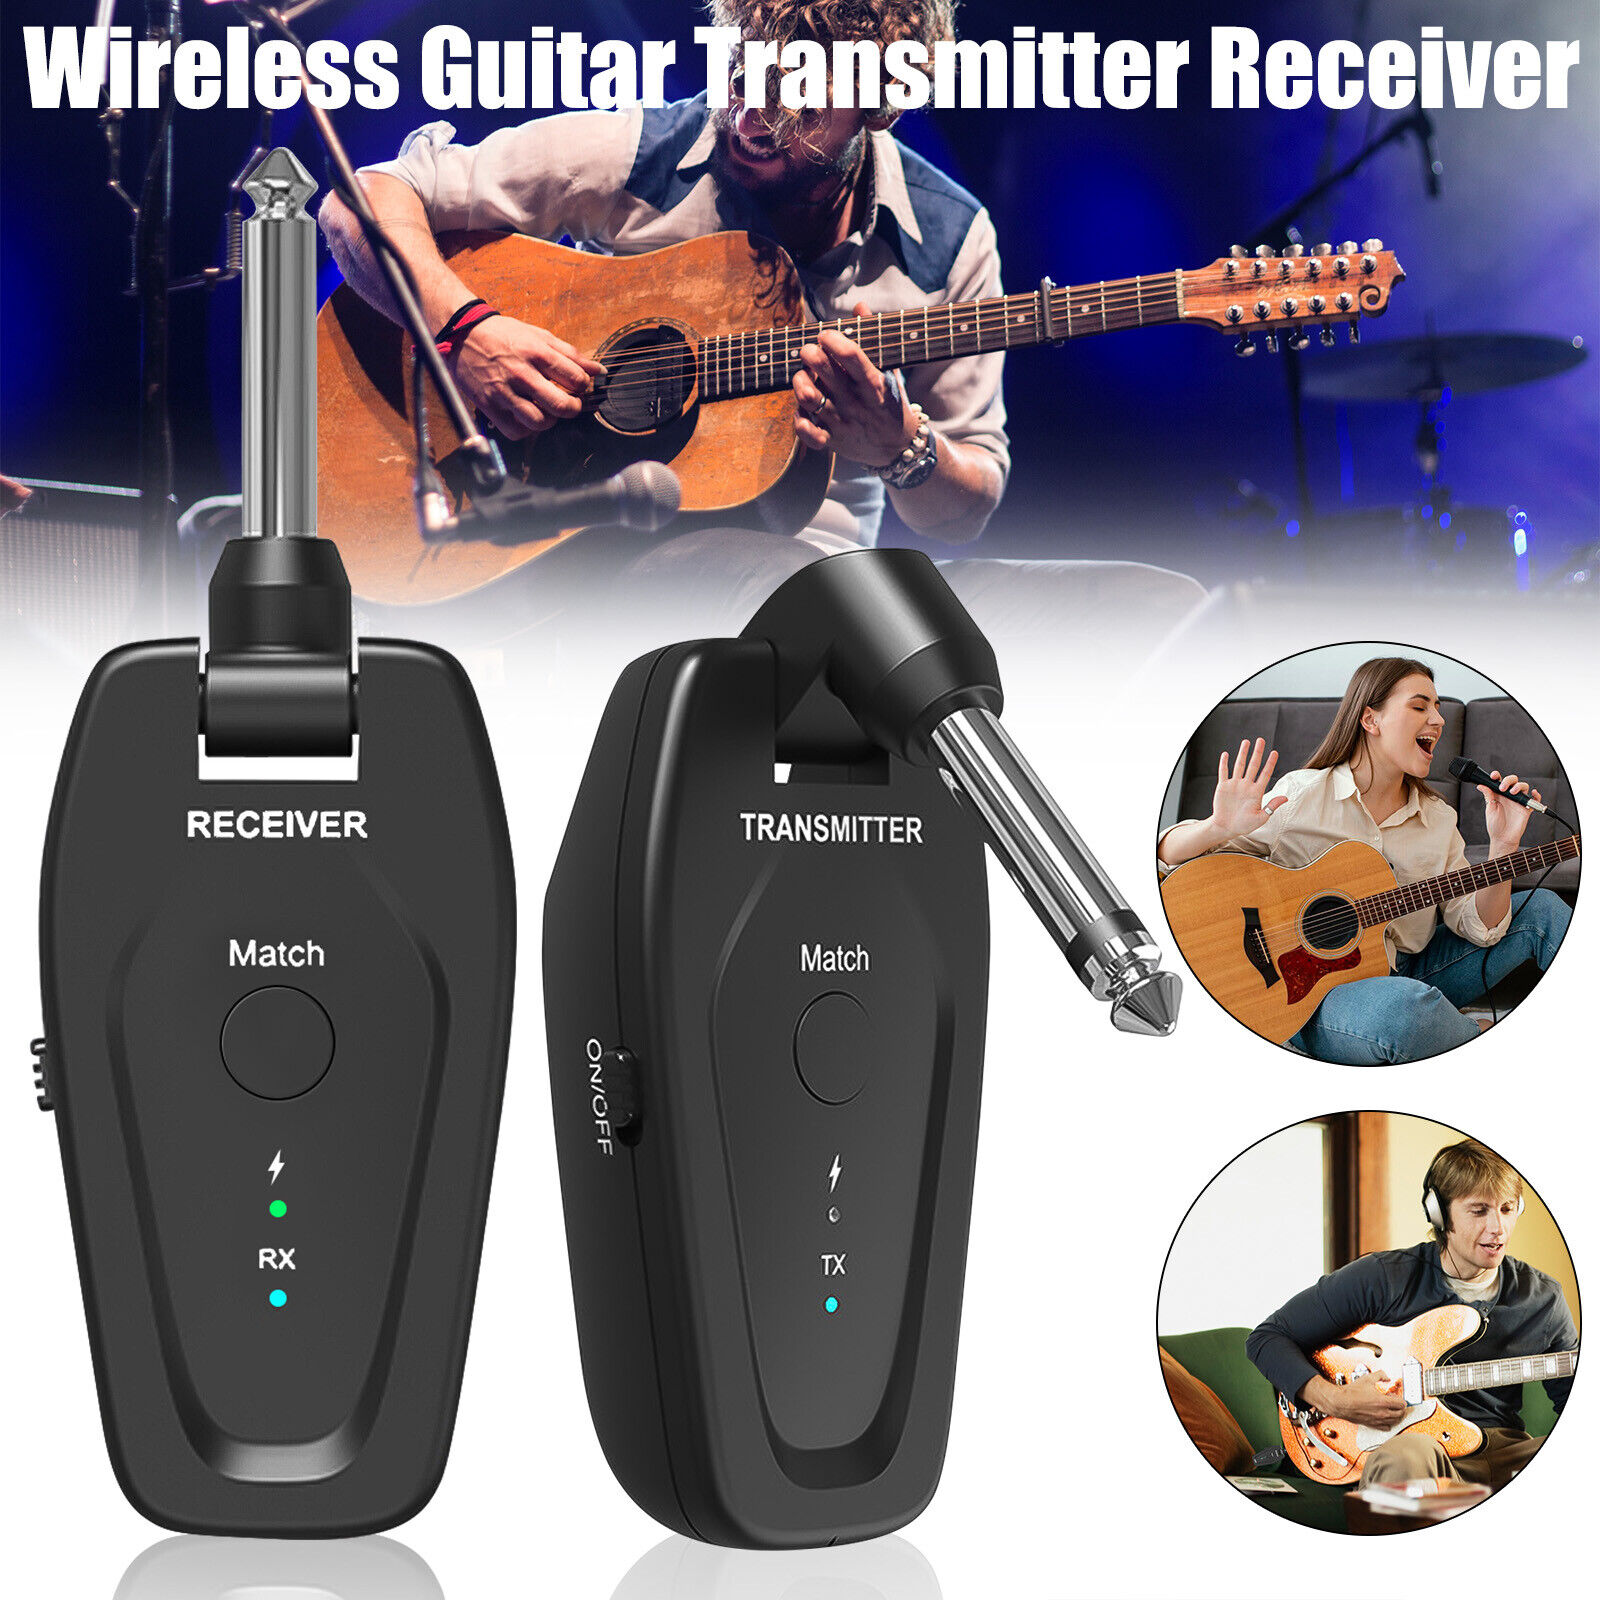 UHF 2.4GHz Wireless Guitar System Transmitter Receiver 4 Channels Rechargeable